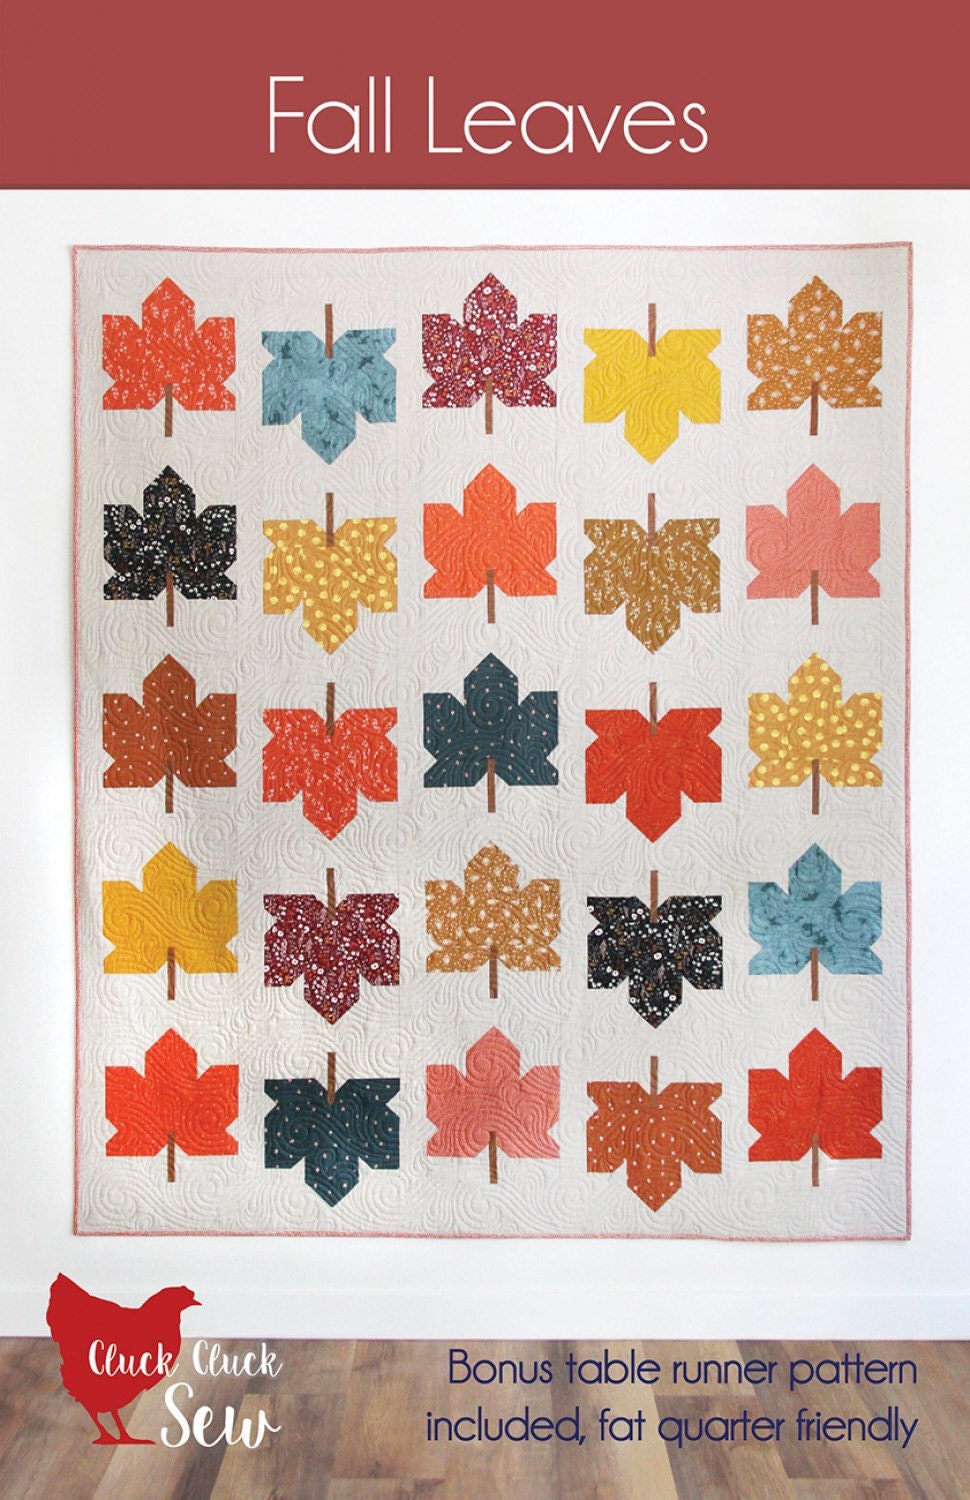 Fall Leaves Quilt Pattern - Cluck Cluck Sew - Fat Quarter Friendly - Bonus Table Runner Pattern Included